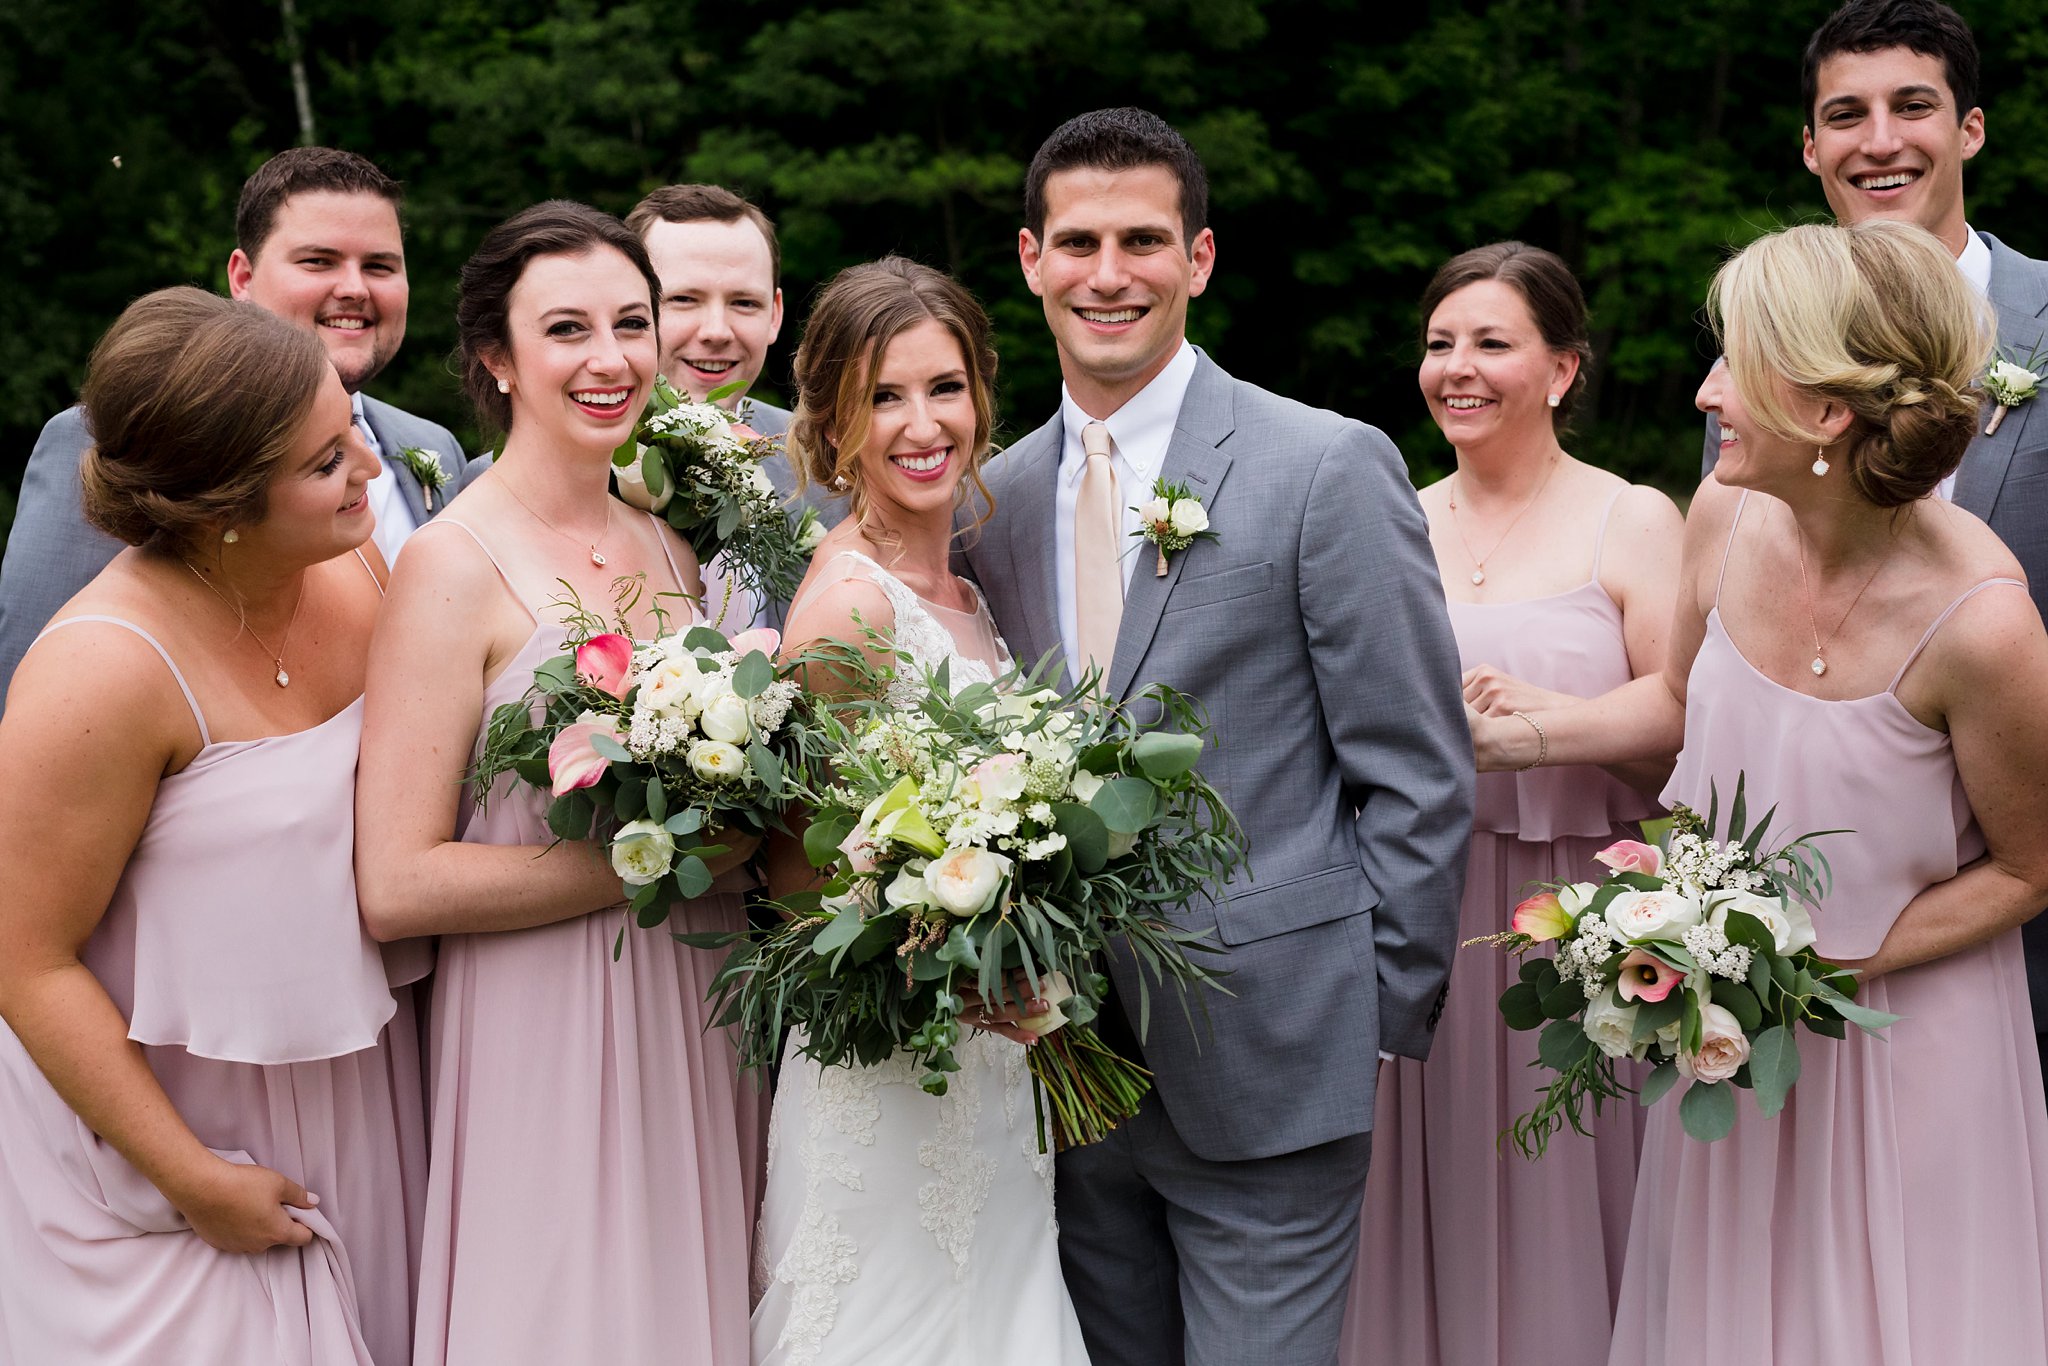 The Preserve at Chocorua New Hampshire Wedding with the wedding party enjoying a laugh together before the outdoor tented ceremony